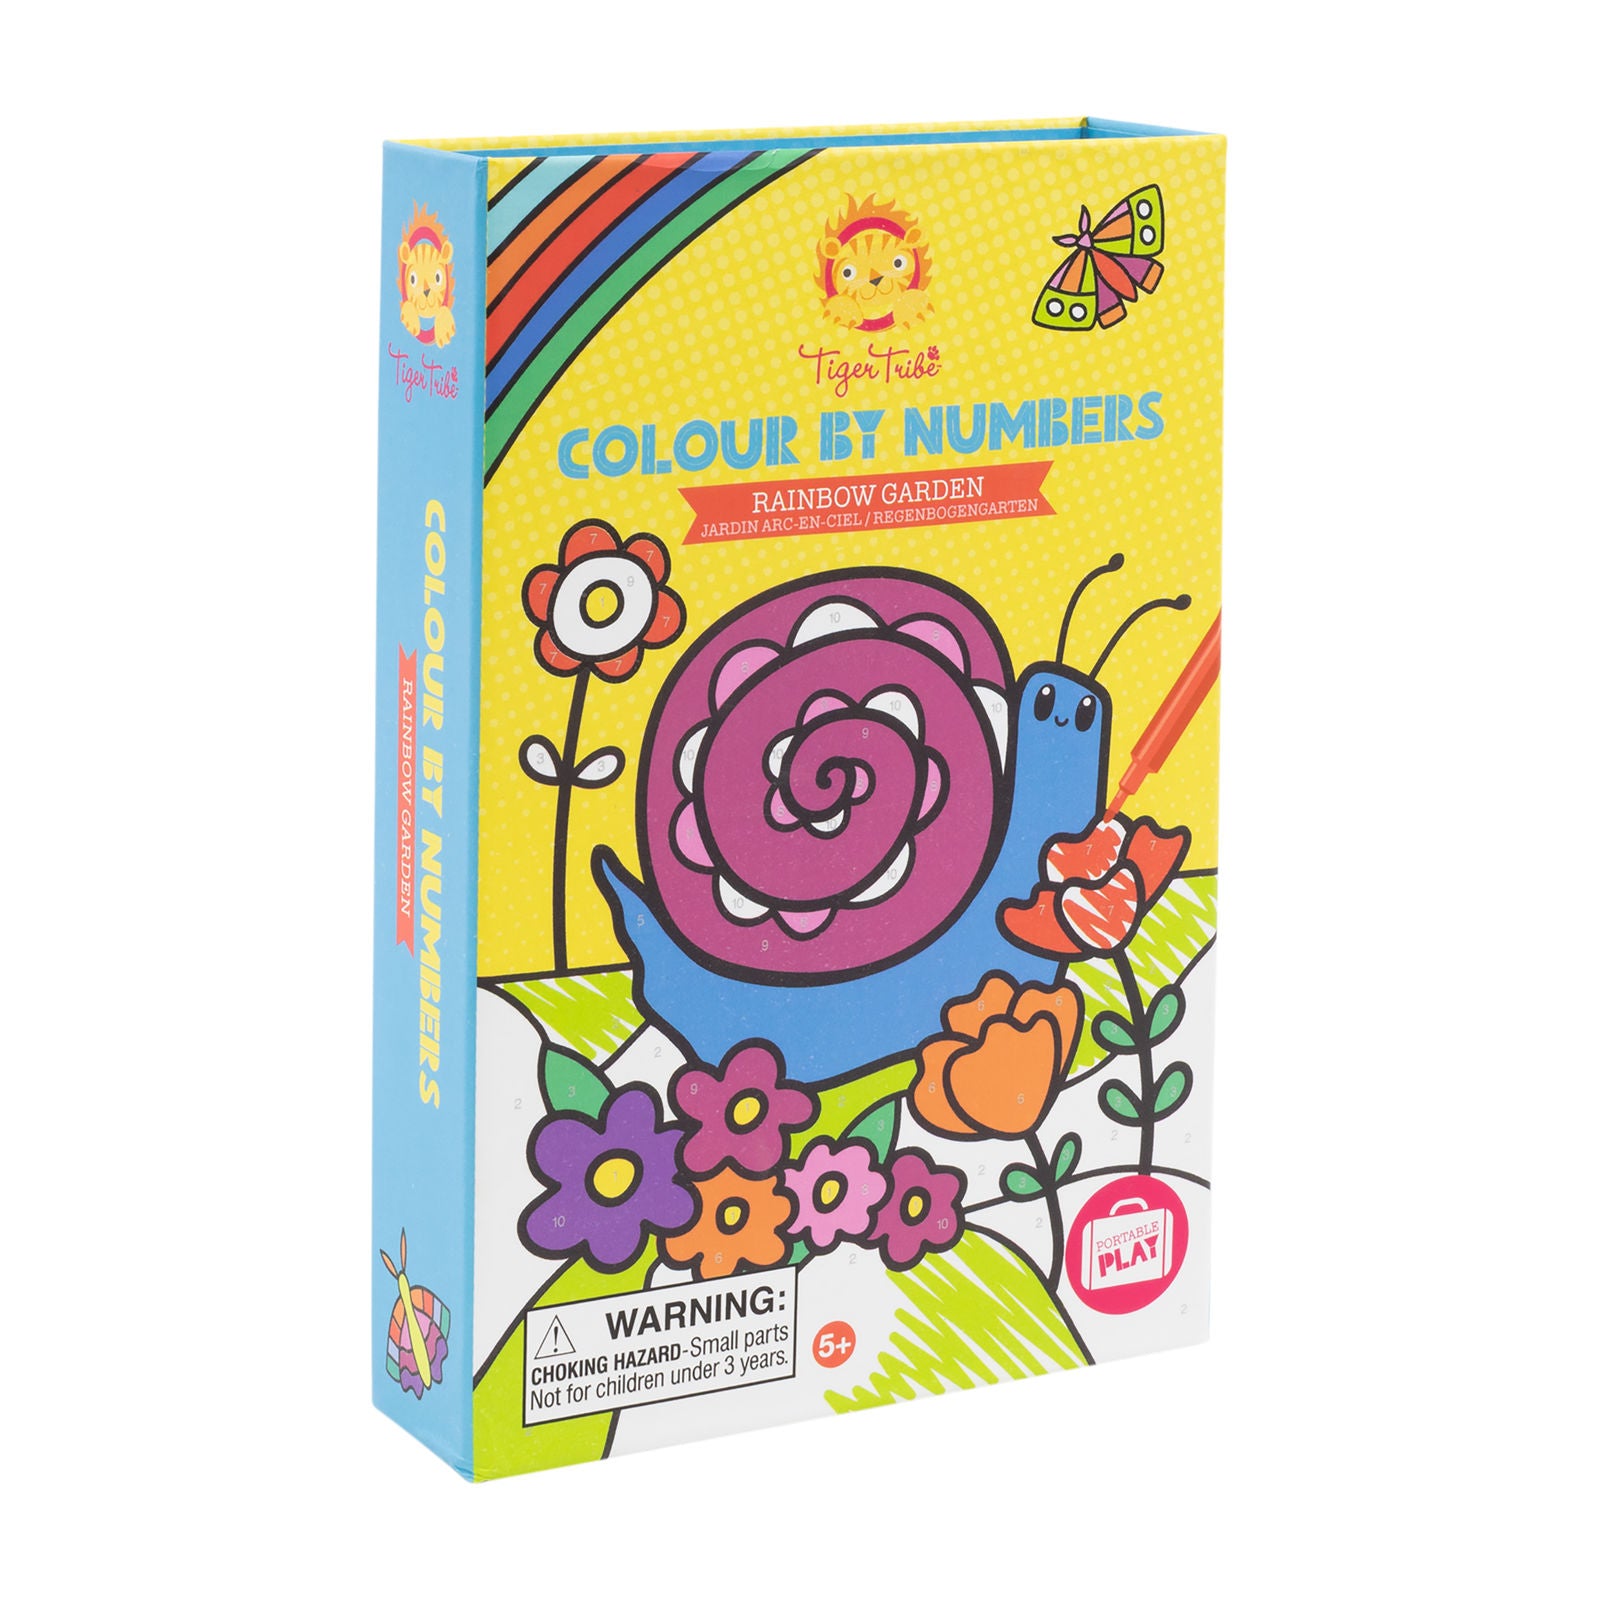 Tiger Tribe Colour by Numbers – Rainbow Garden